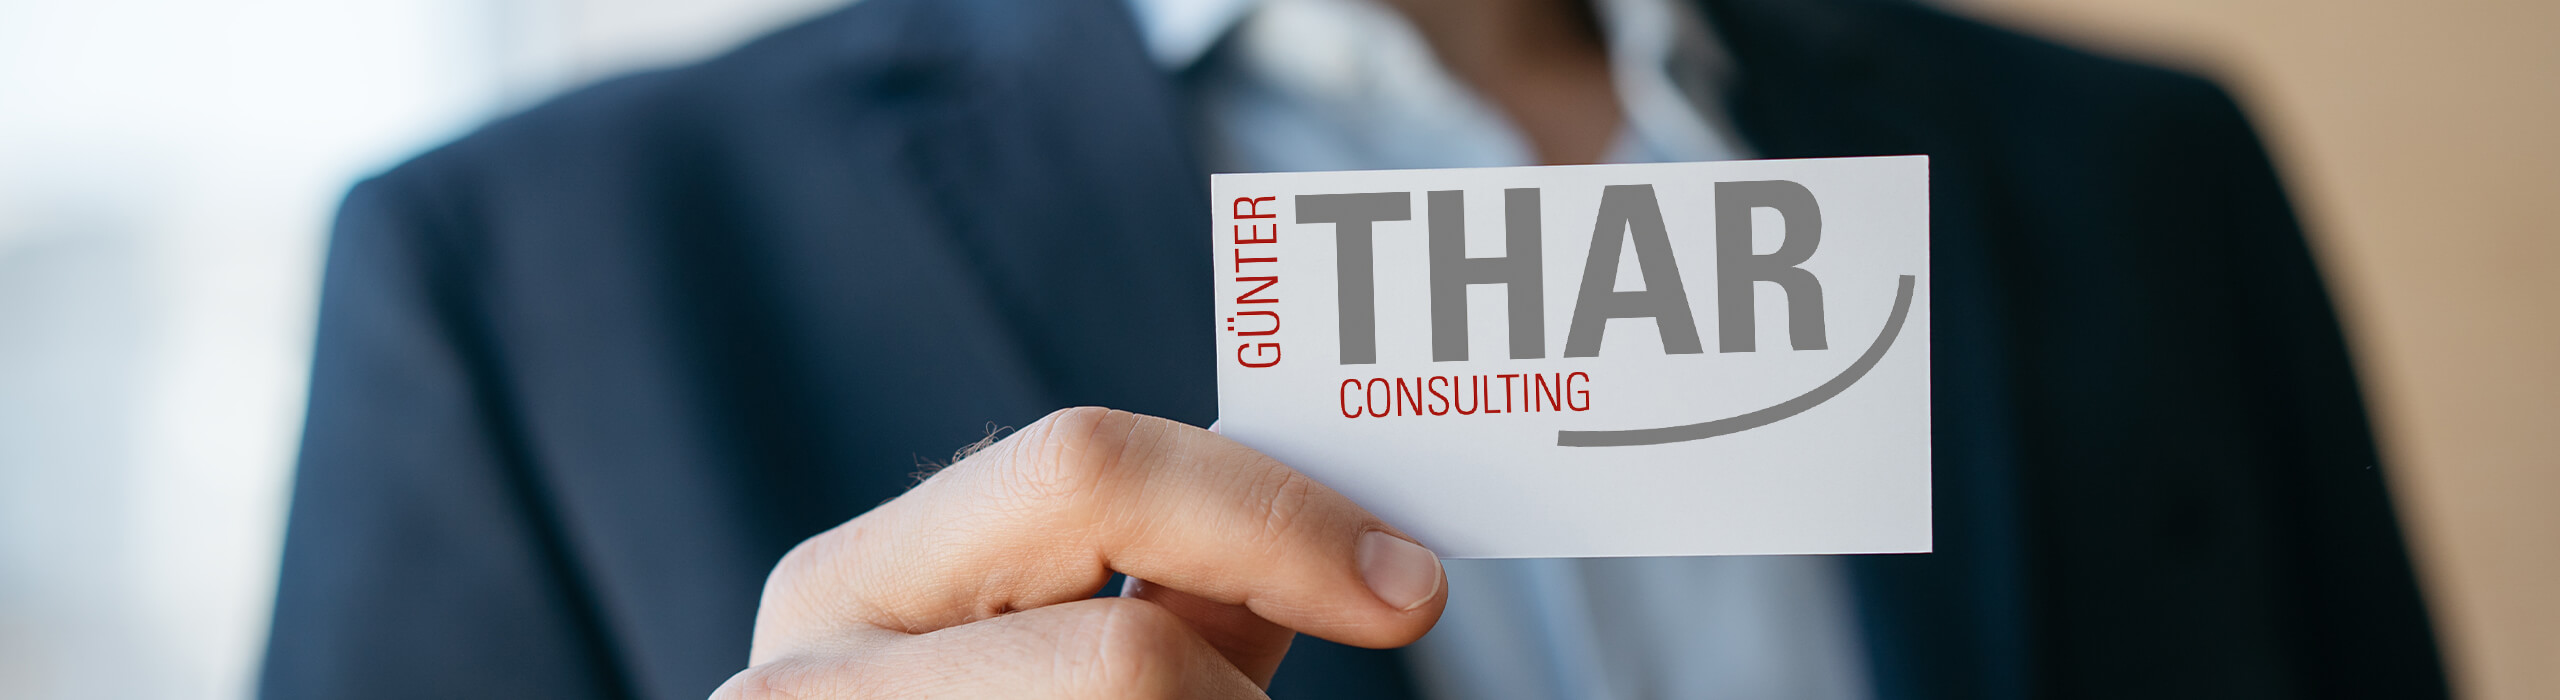 Thar Consulting